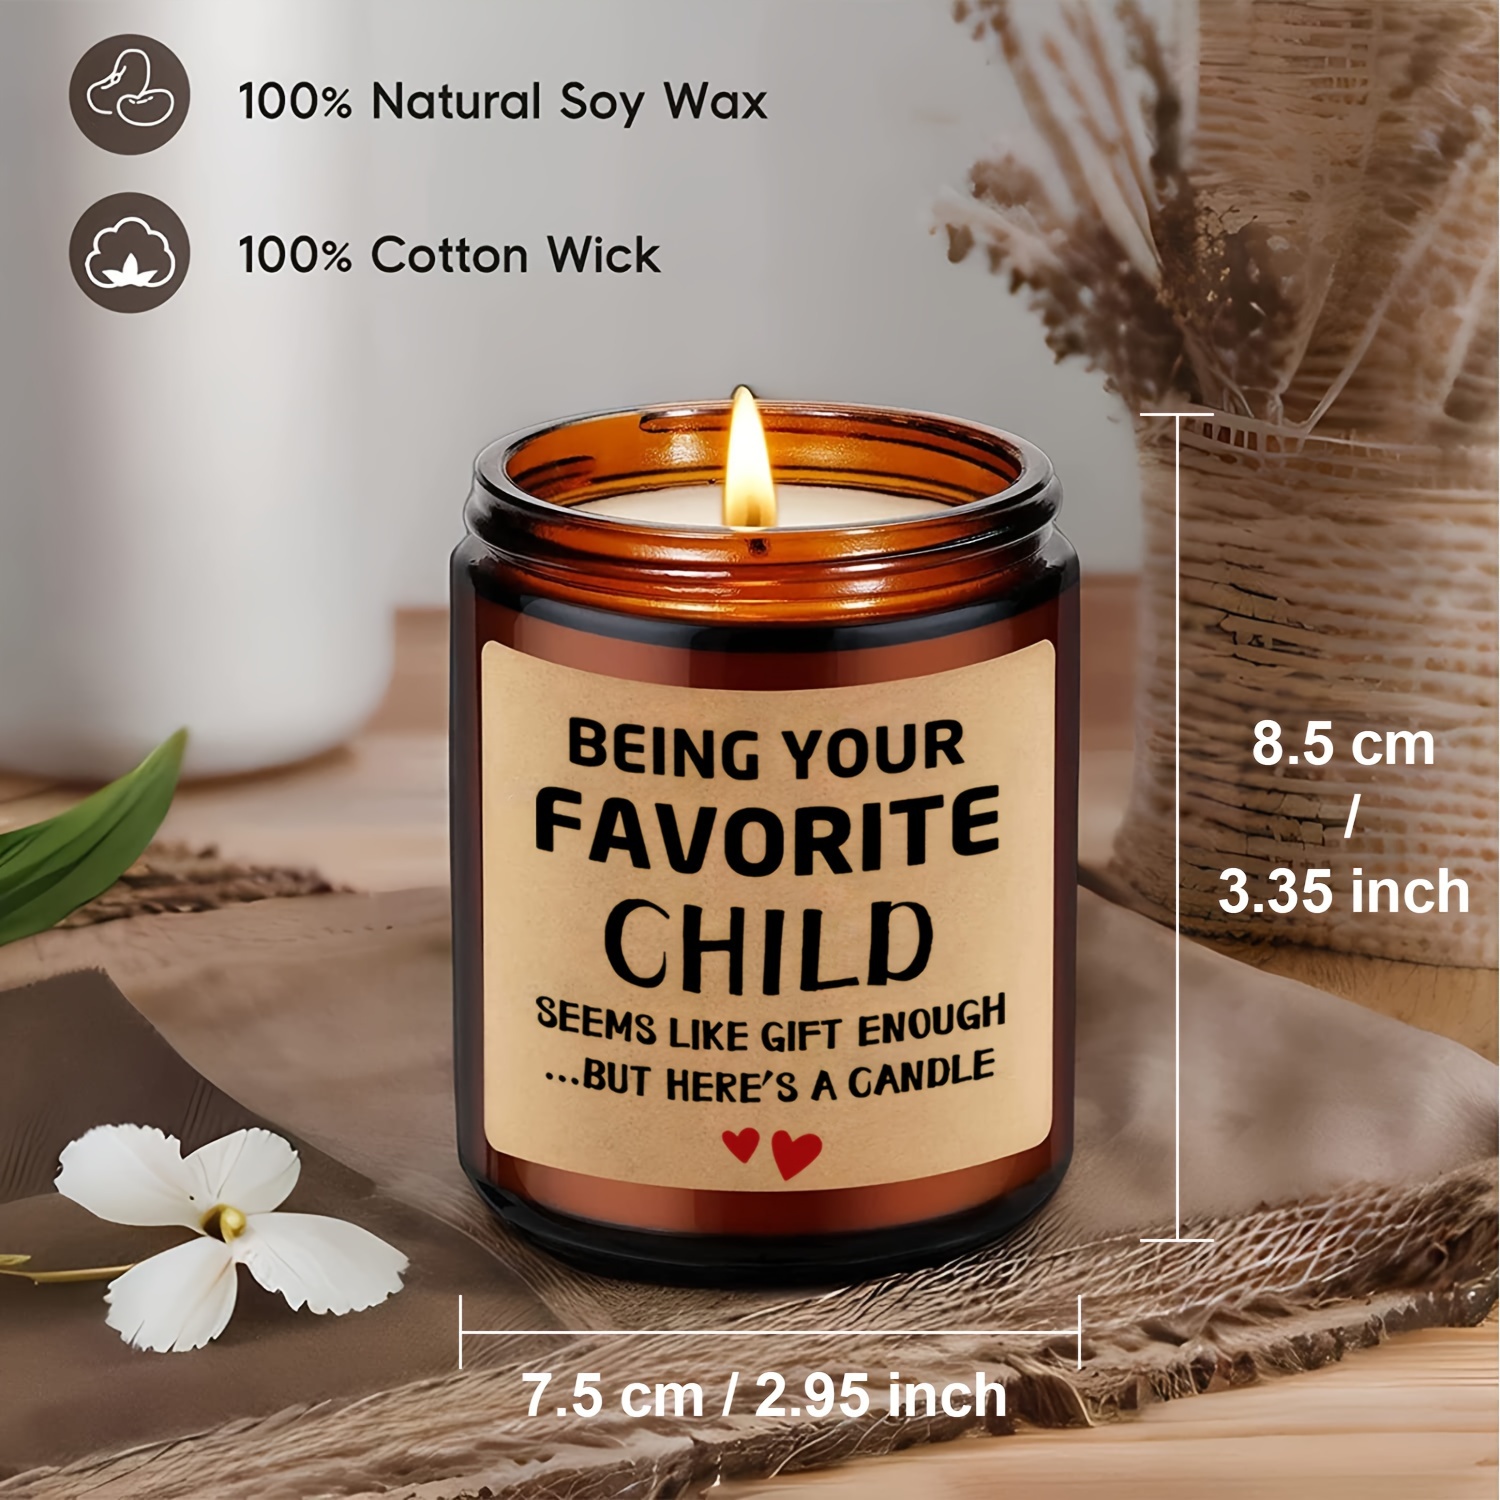 Mothers Day Candle Gifts for Mom, Gifts for Mom from Daughter Son